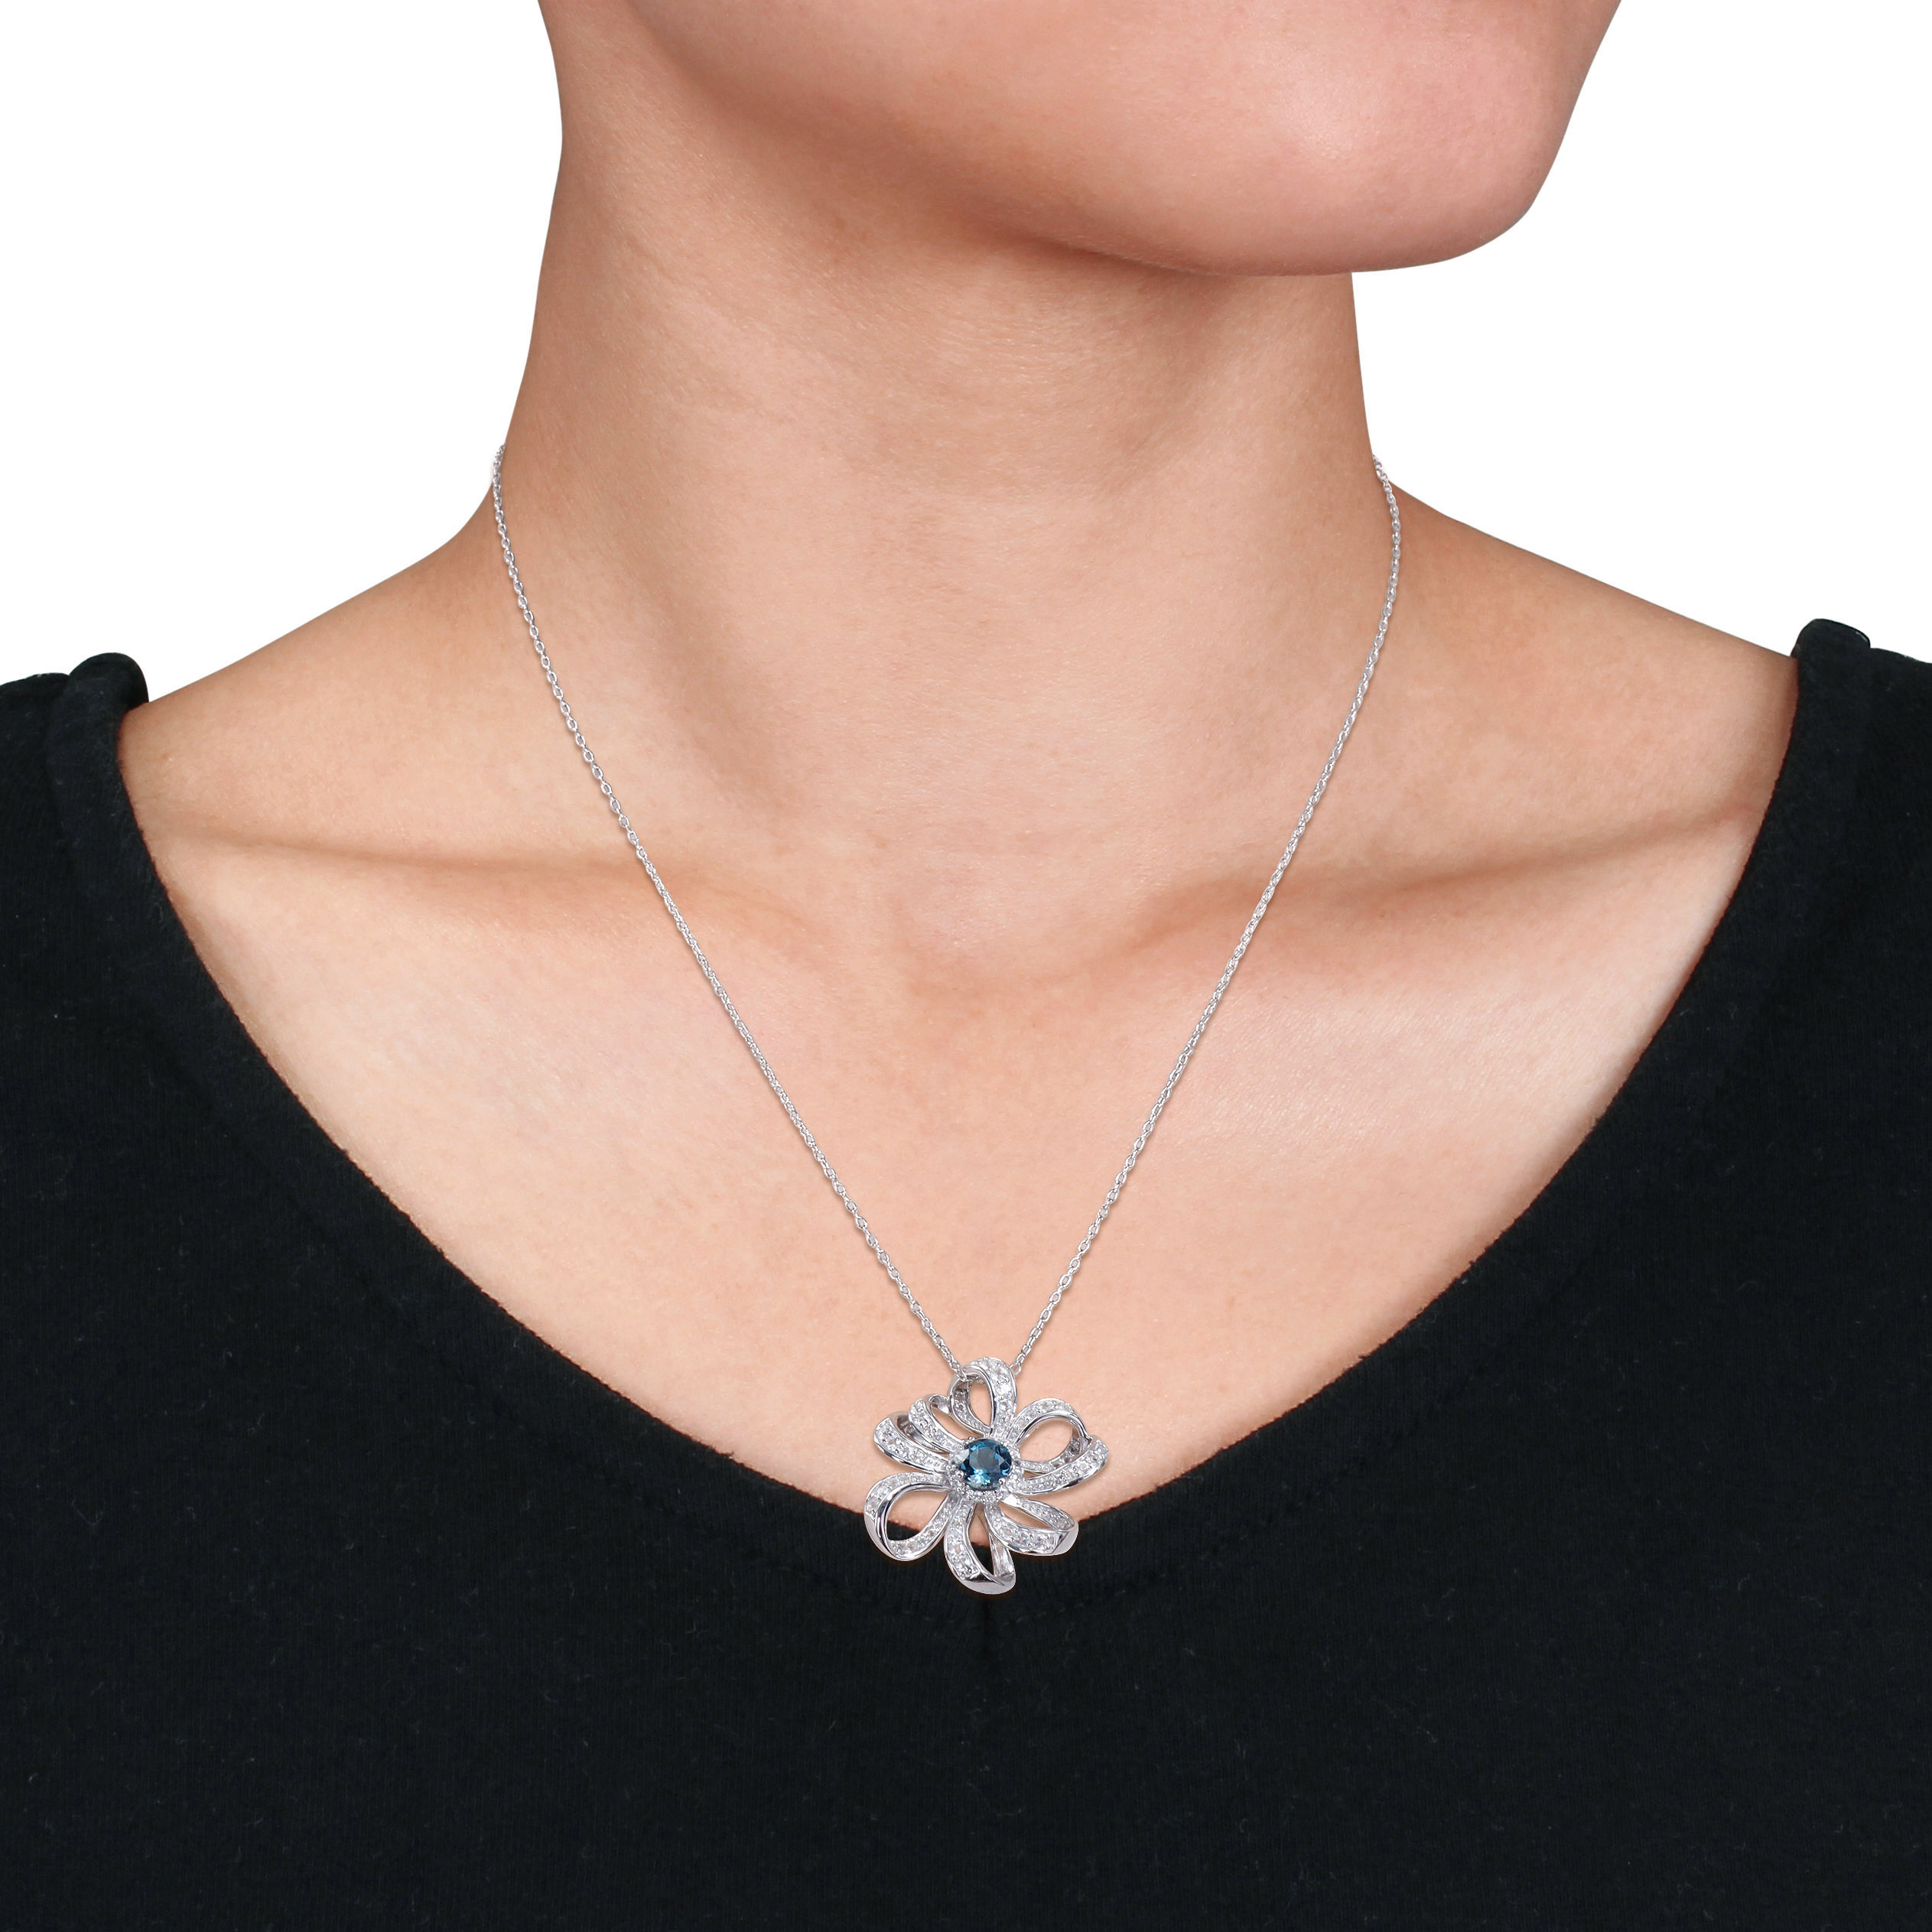 2 1/4 CT TGW London Blue Topaz and White Topaz Flower Pendant with Chain in Sterling Silver